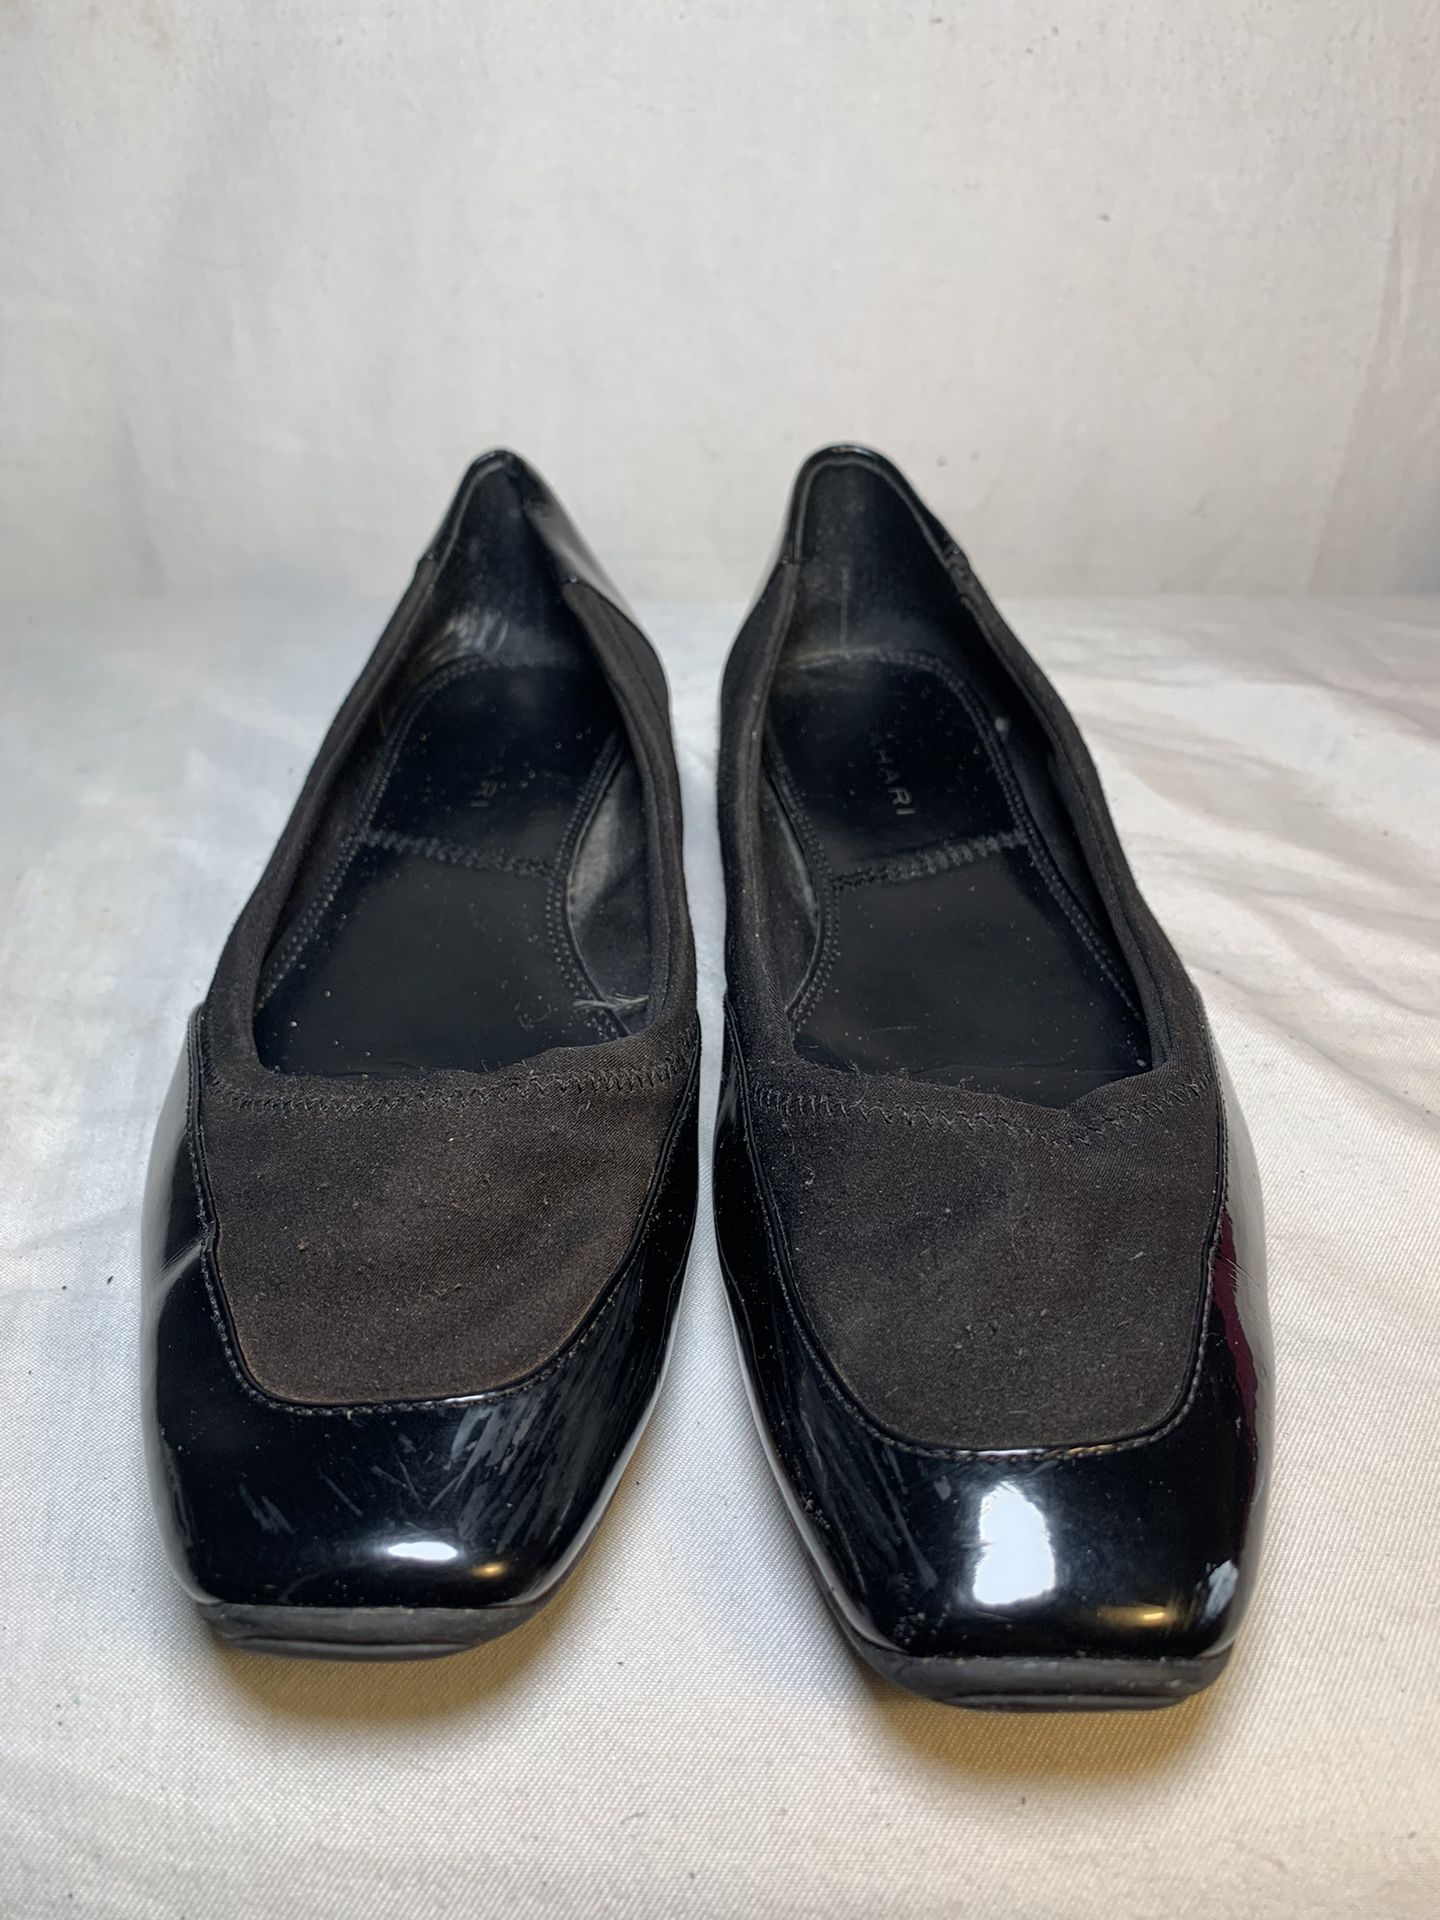 Tahari Chester Black Flats with Pointed Square Toe Size 8